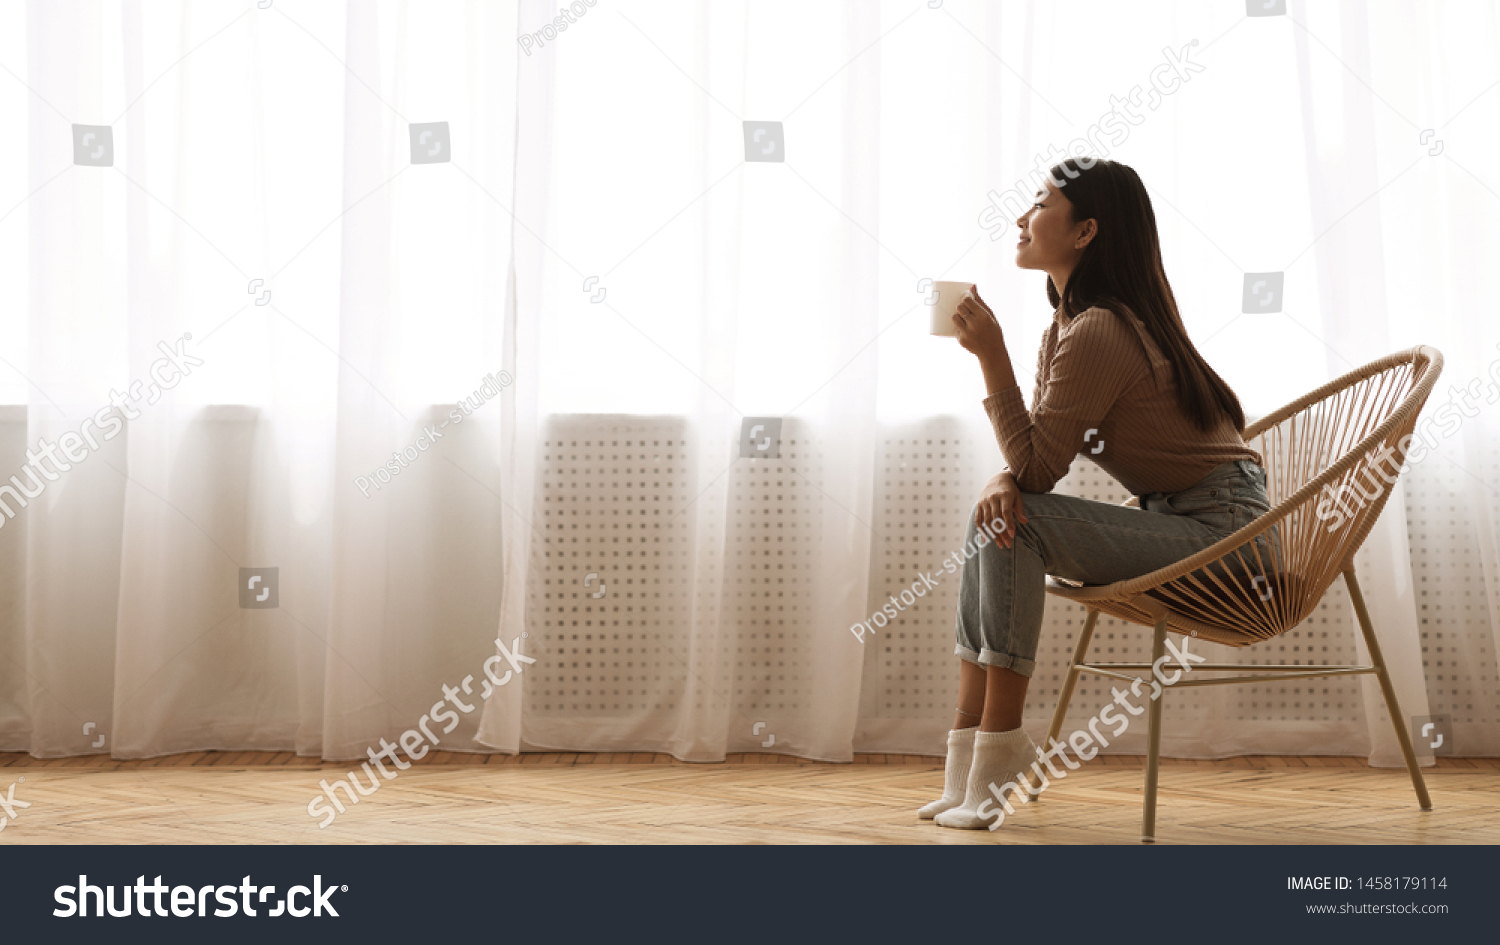 Morning Relaxation. Girl Sitting in Armchair And Enjoying Coffee against Window, Free Space #1458179114